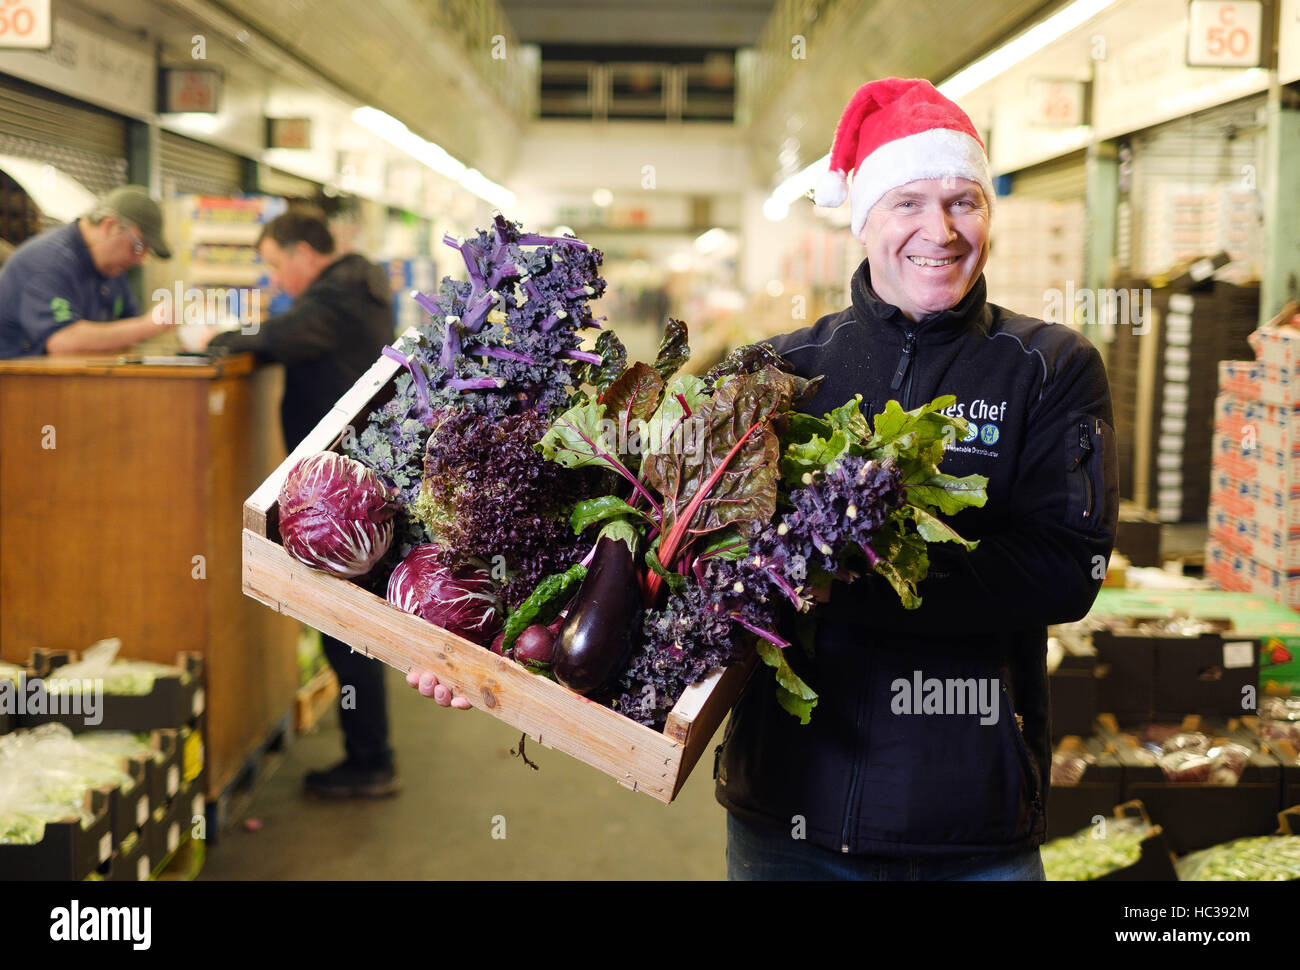 EDITORIAL USE ONLY Trader Craig Currie from Yes Chef, prepares a box of purple seasonal vegetables ahead of Christmas at New Covent Garden Market, in Nine Elms, London. Stock Photo